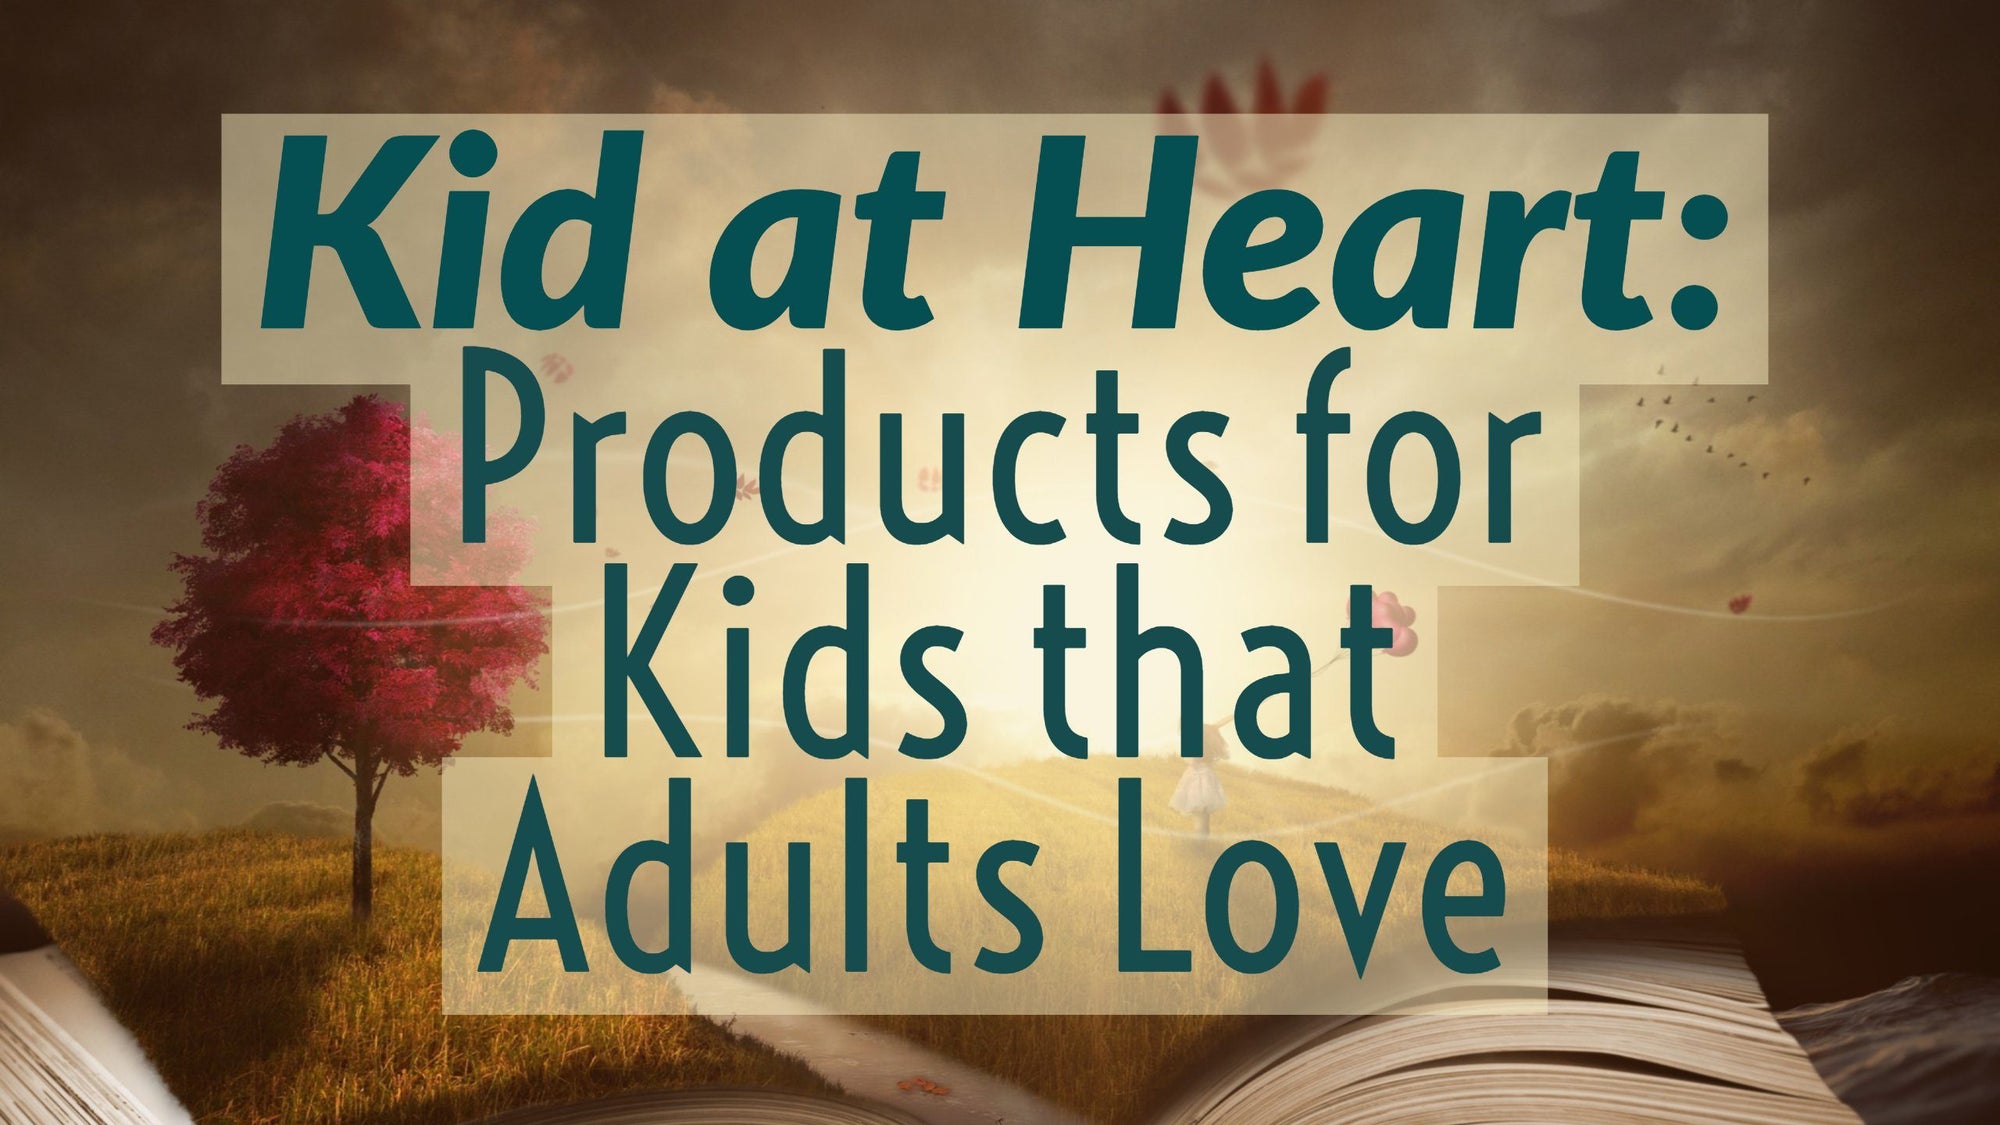 Kids at Heart: 3 Products for Children That Adults Love Too!